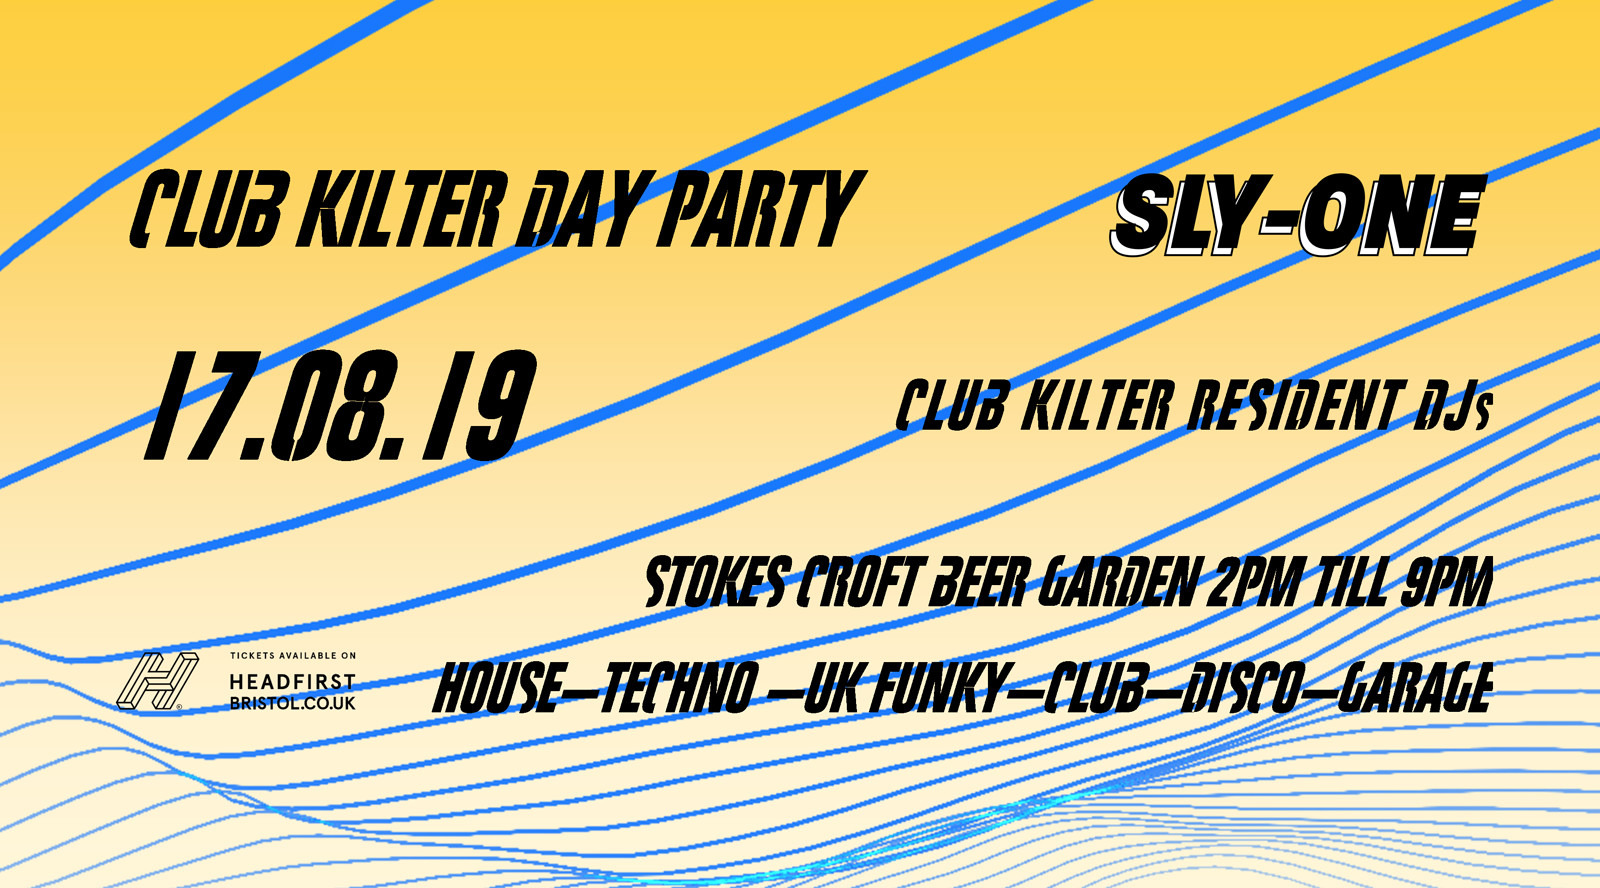 Club Kilter Day Party with Sly-One at Stokes Croft Beer Garden